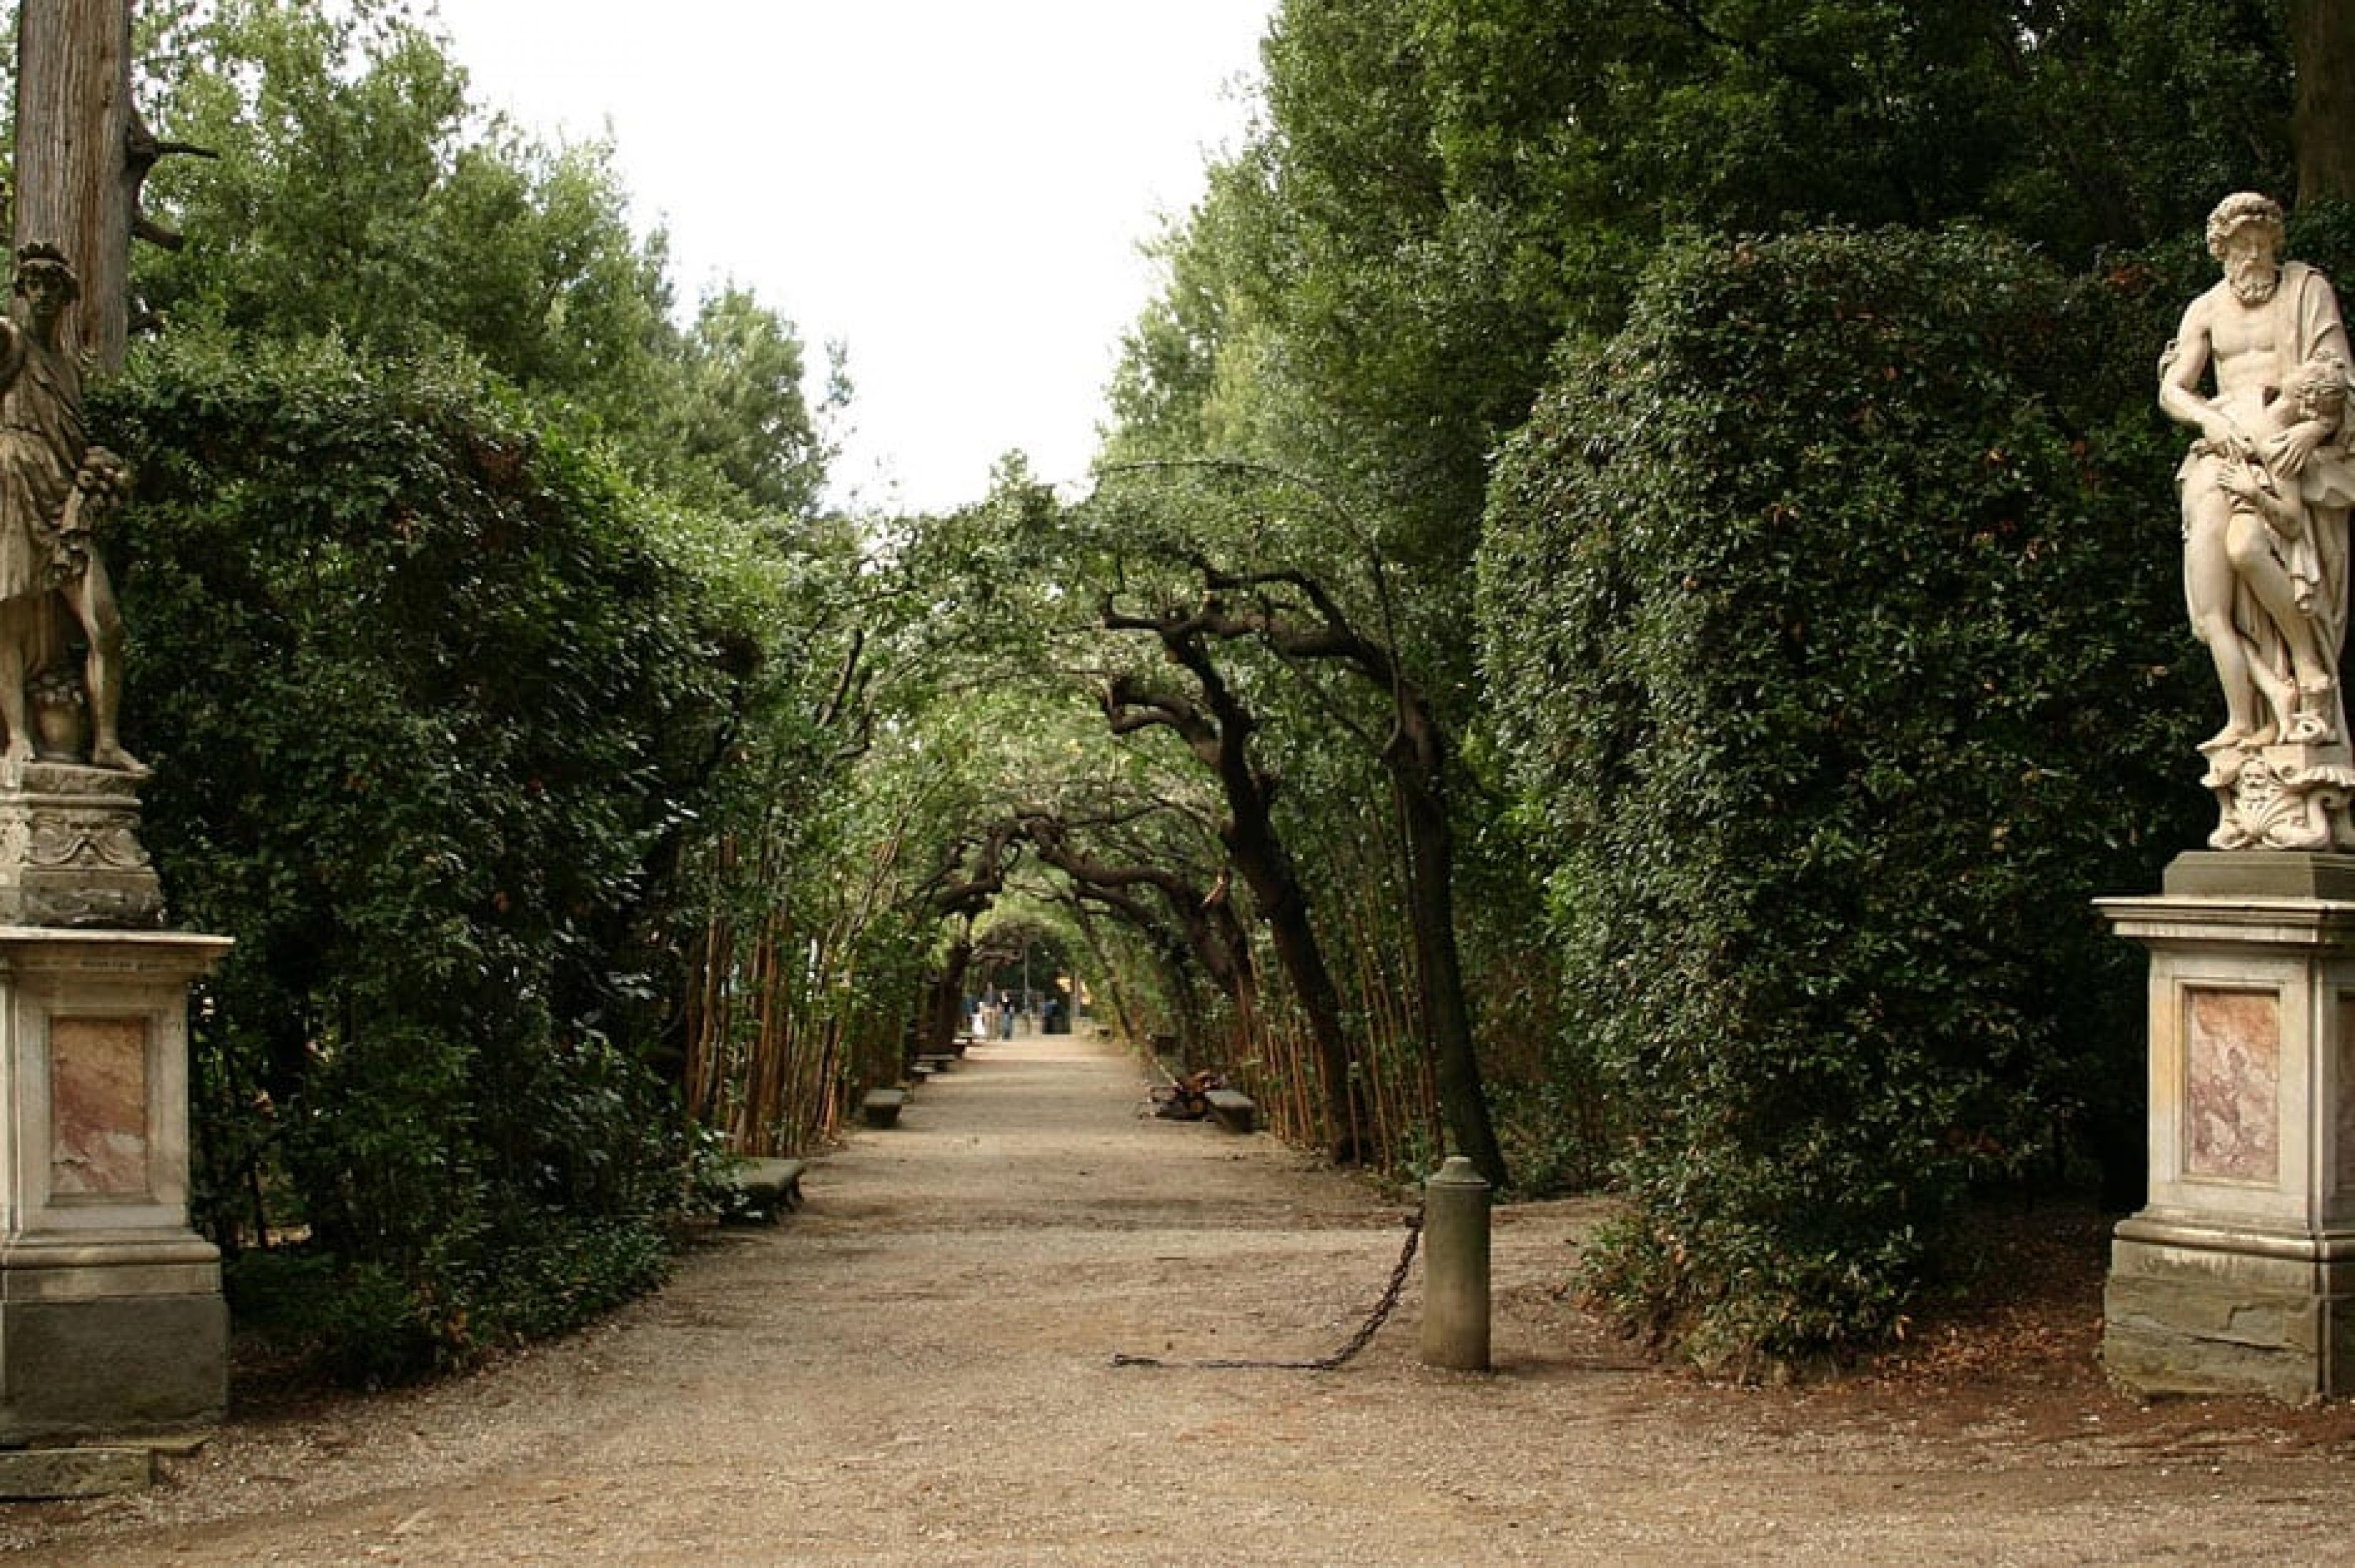 Outside view - Boboli Gardens, Florence, Italy  - credit Stefan Bauer